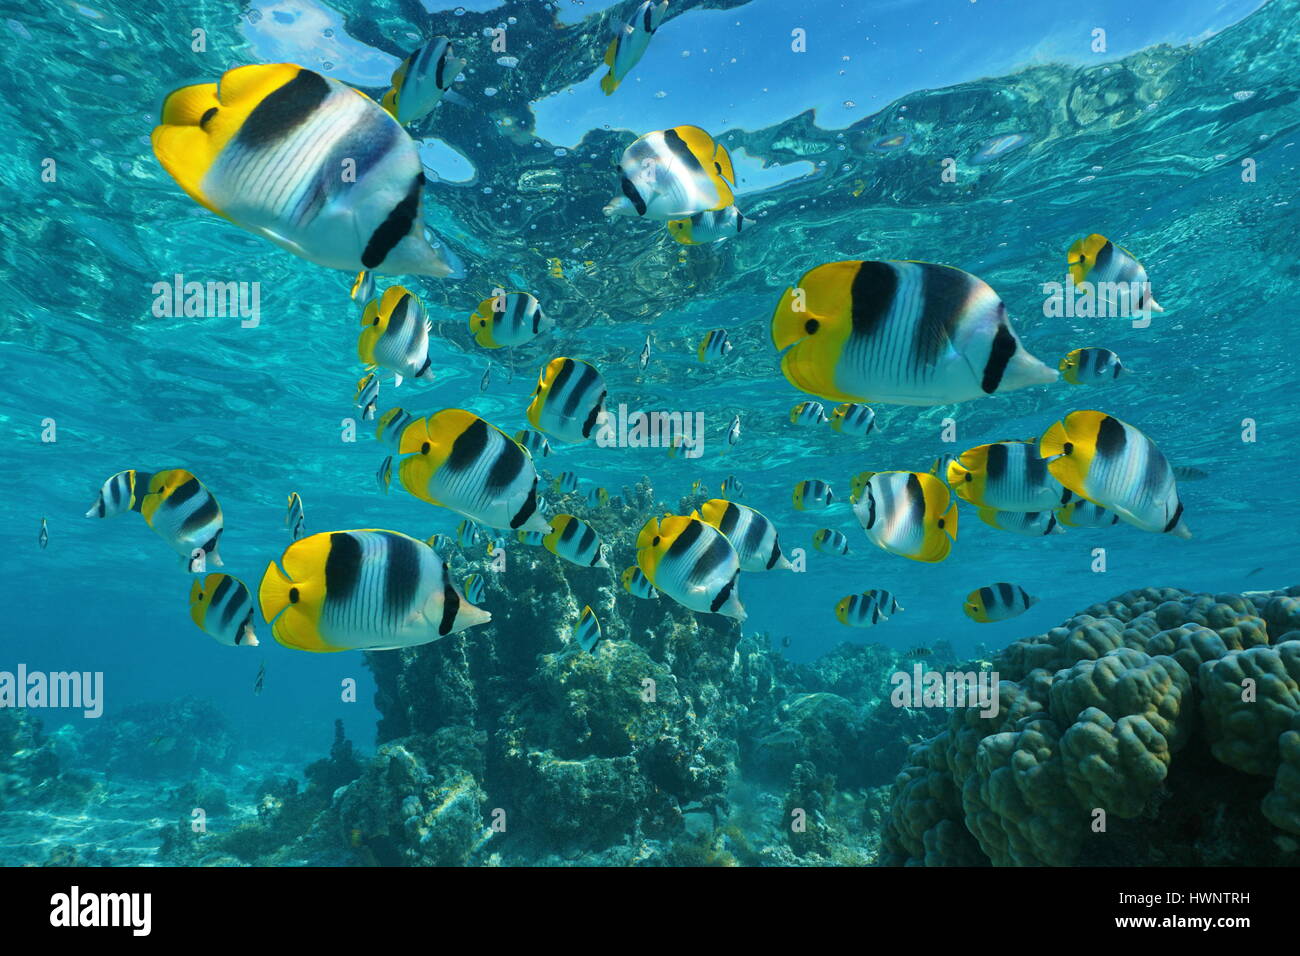 Shoal of tropical fish underwater, Pacific double-saddle butterflyfish, Chaetodon ulietensis, Pacific ocean, French Polynesia Stock Photo